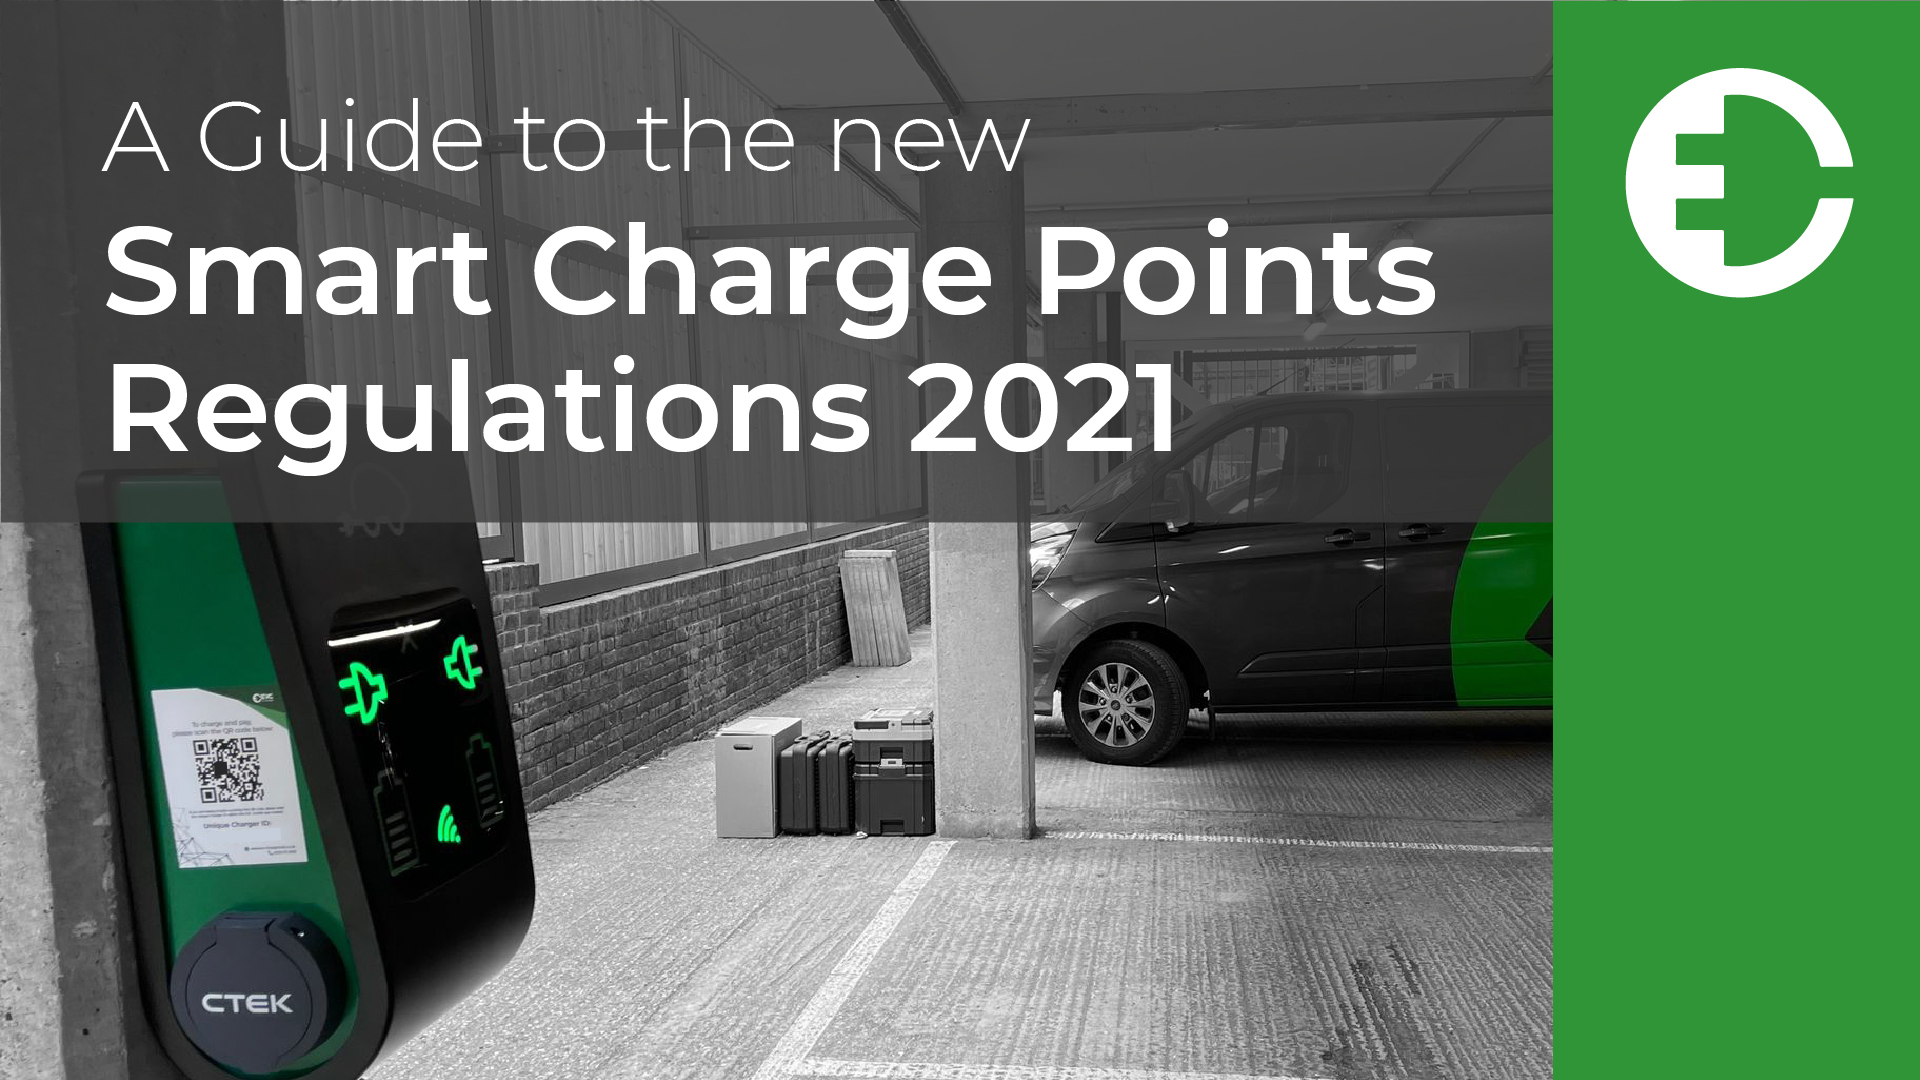 A Guide to the new Smart Charge Points Regulations 2021